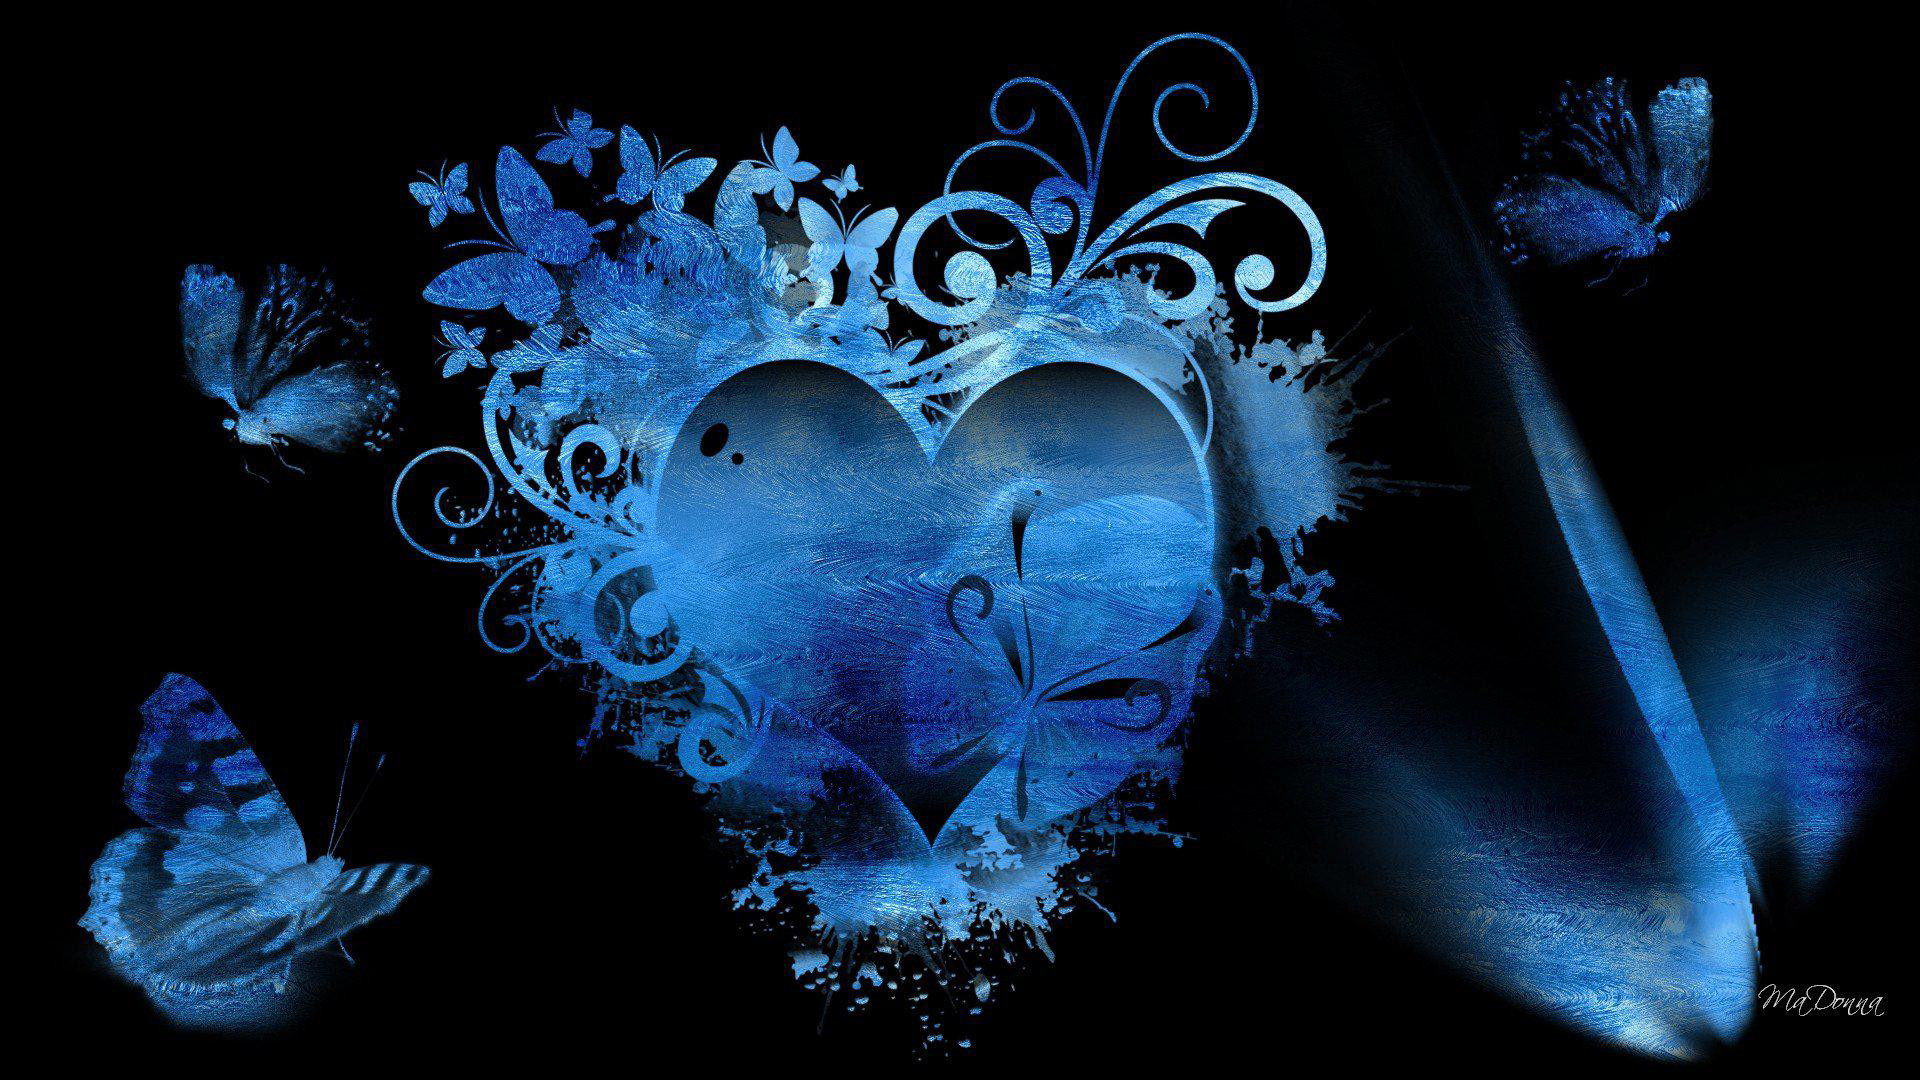 1920x1080  black and blue wallpaper - Black And Blue HD Wallpaper | HD  Wallpapers | Pinterest